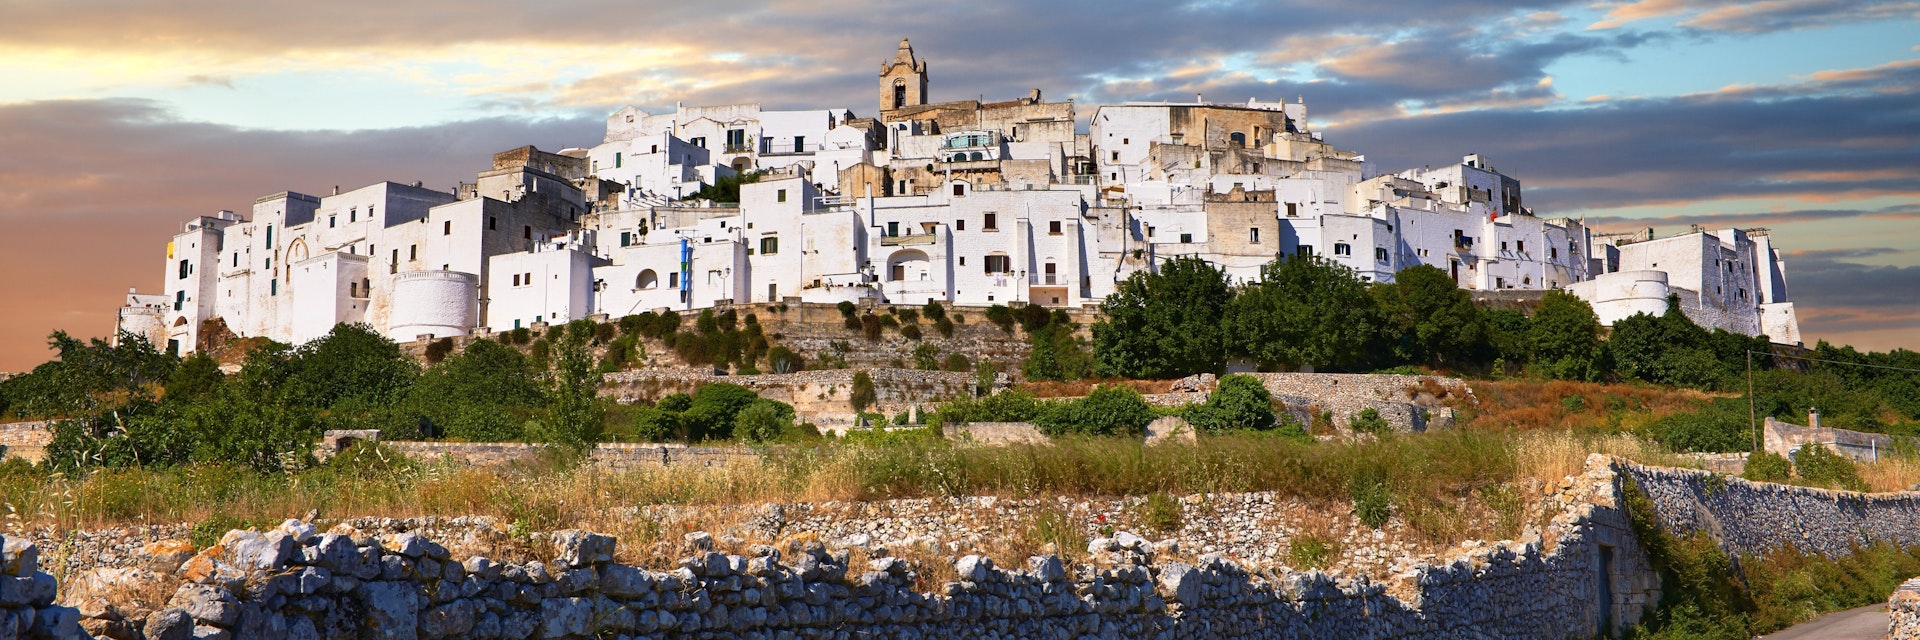 Italy, Lecce, Puglia, Ostuni, Medieval white fortified hill town walls